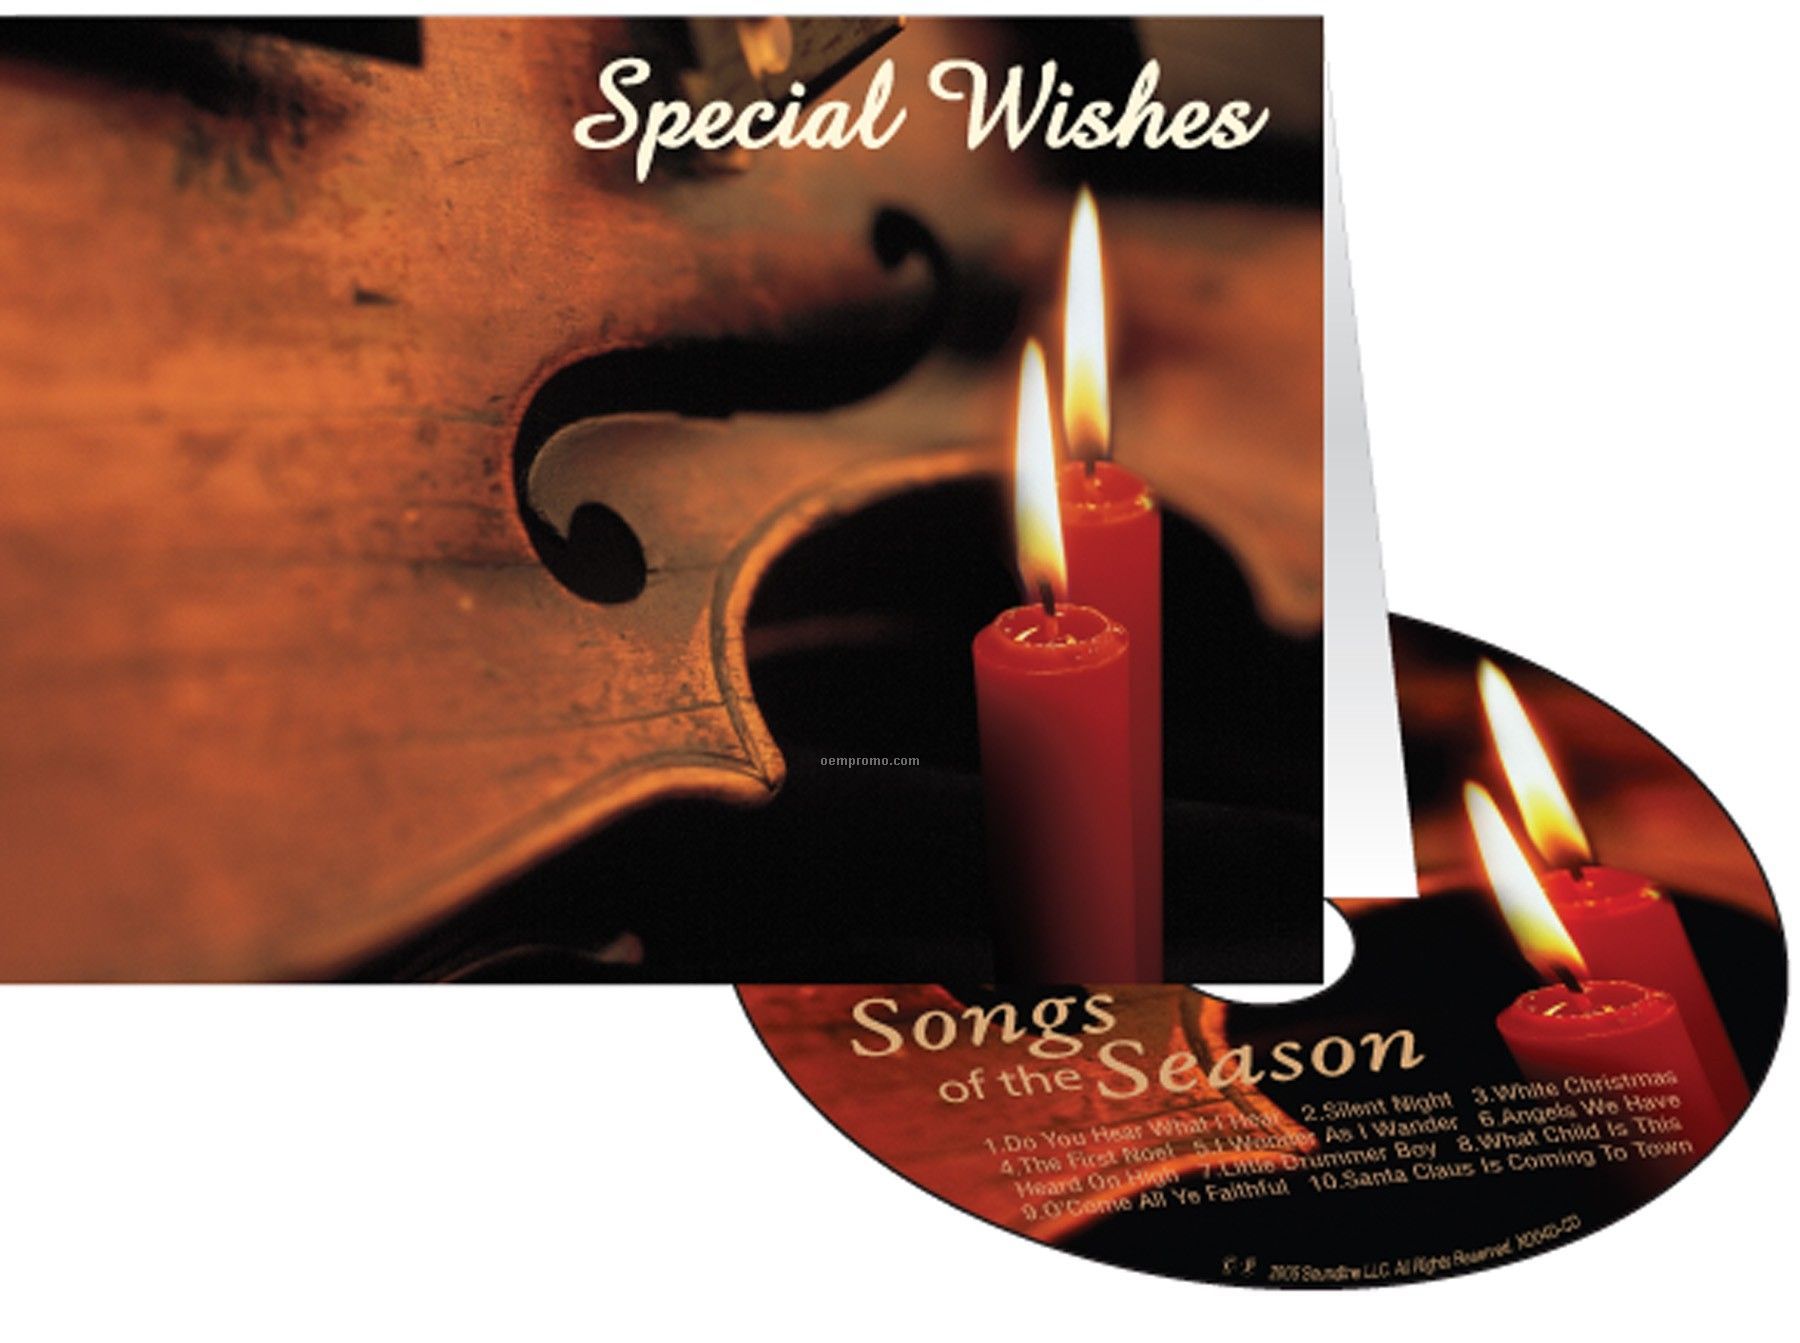 Candles & Violin Special Wishes Holiday Greeting Card With Matching CD